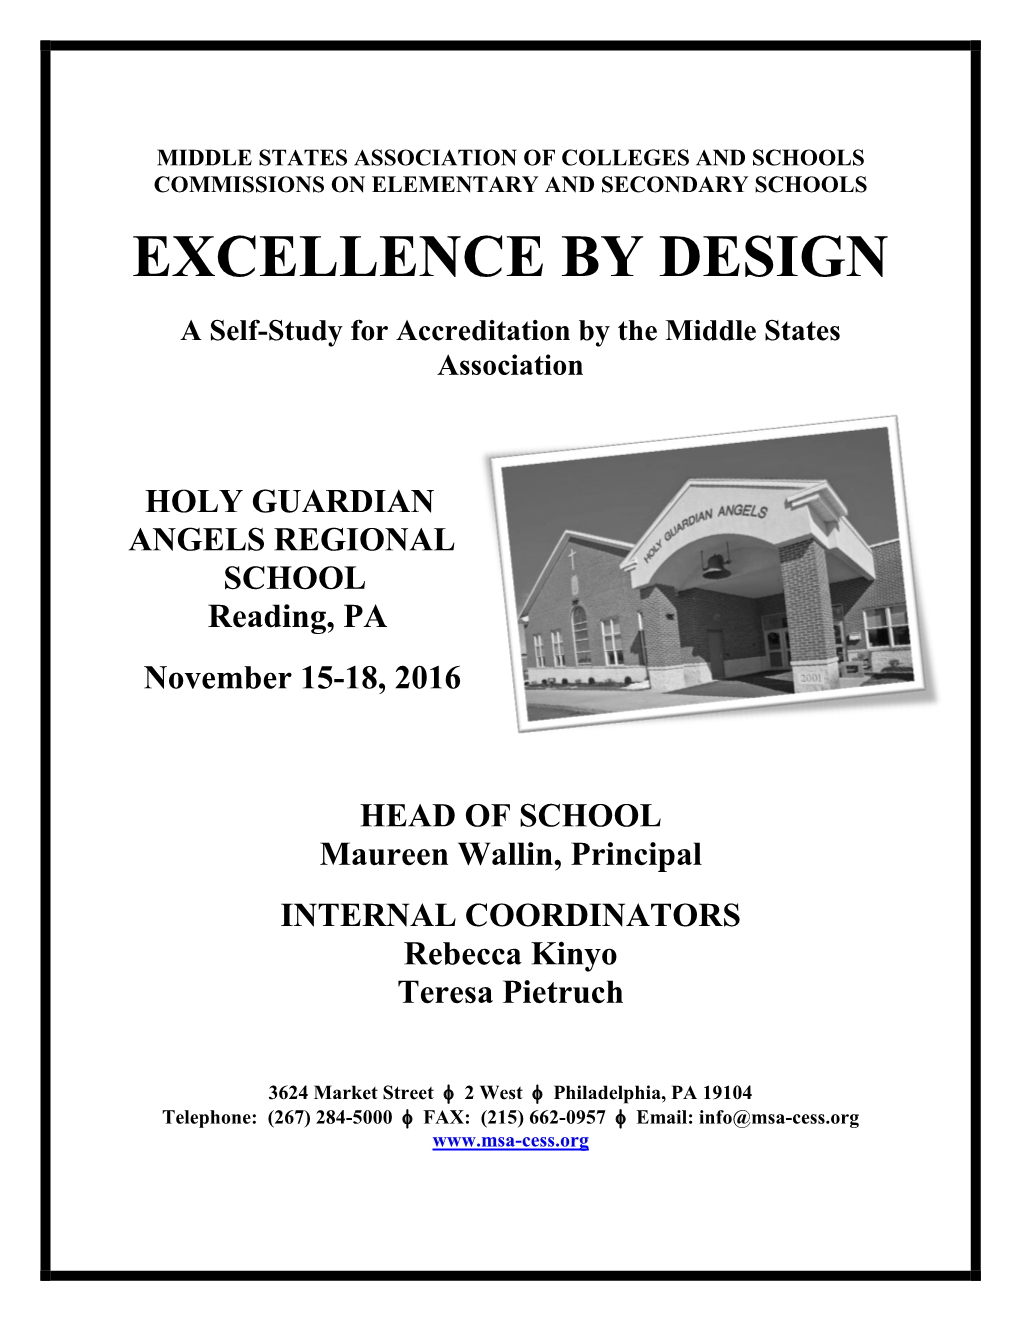 EXCELLENCE by DESIGN a Self-Study For